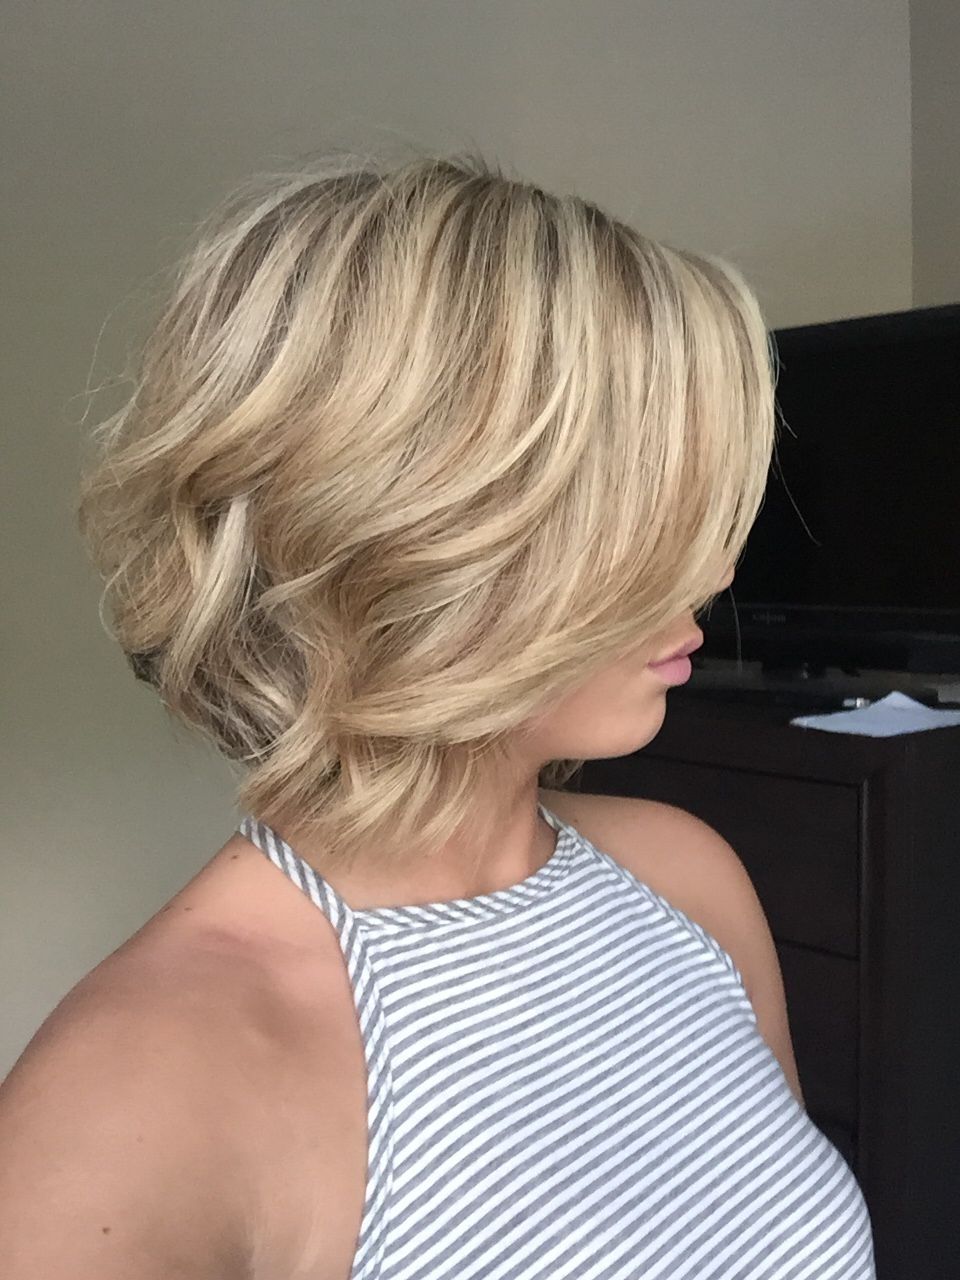 Most Popular Curly Highlighted Blonde Bob Hairstyles Inside Short #blonde #bob #curls #highlights #thickhair (Gallery 19 of 20)